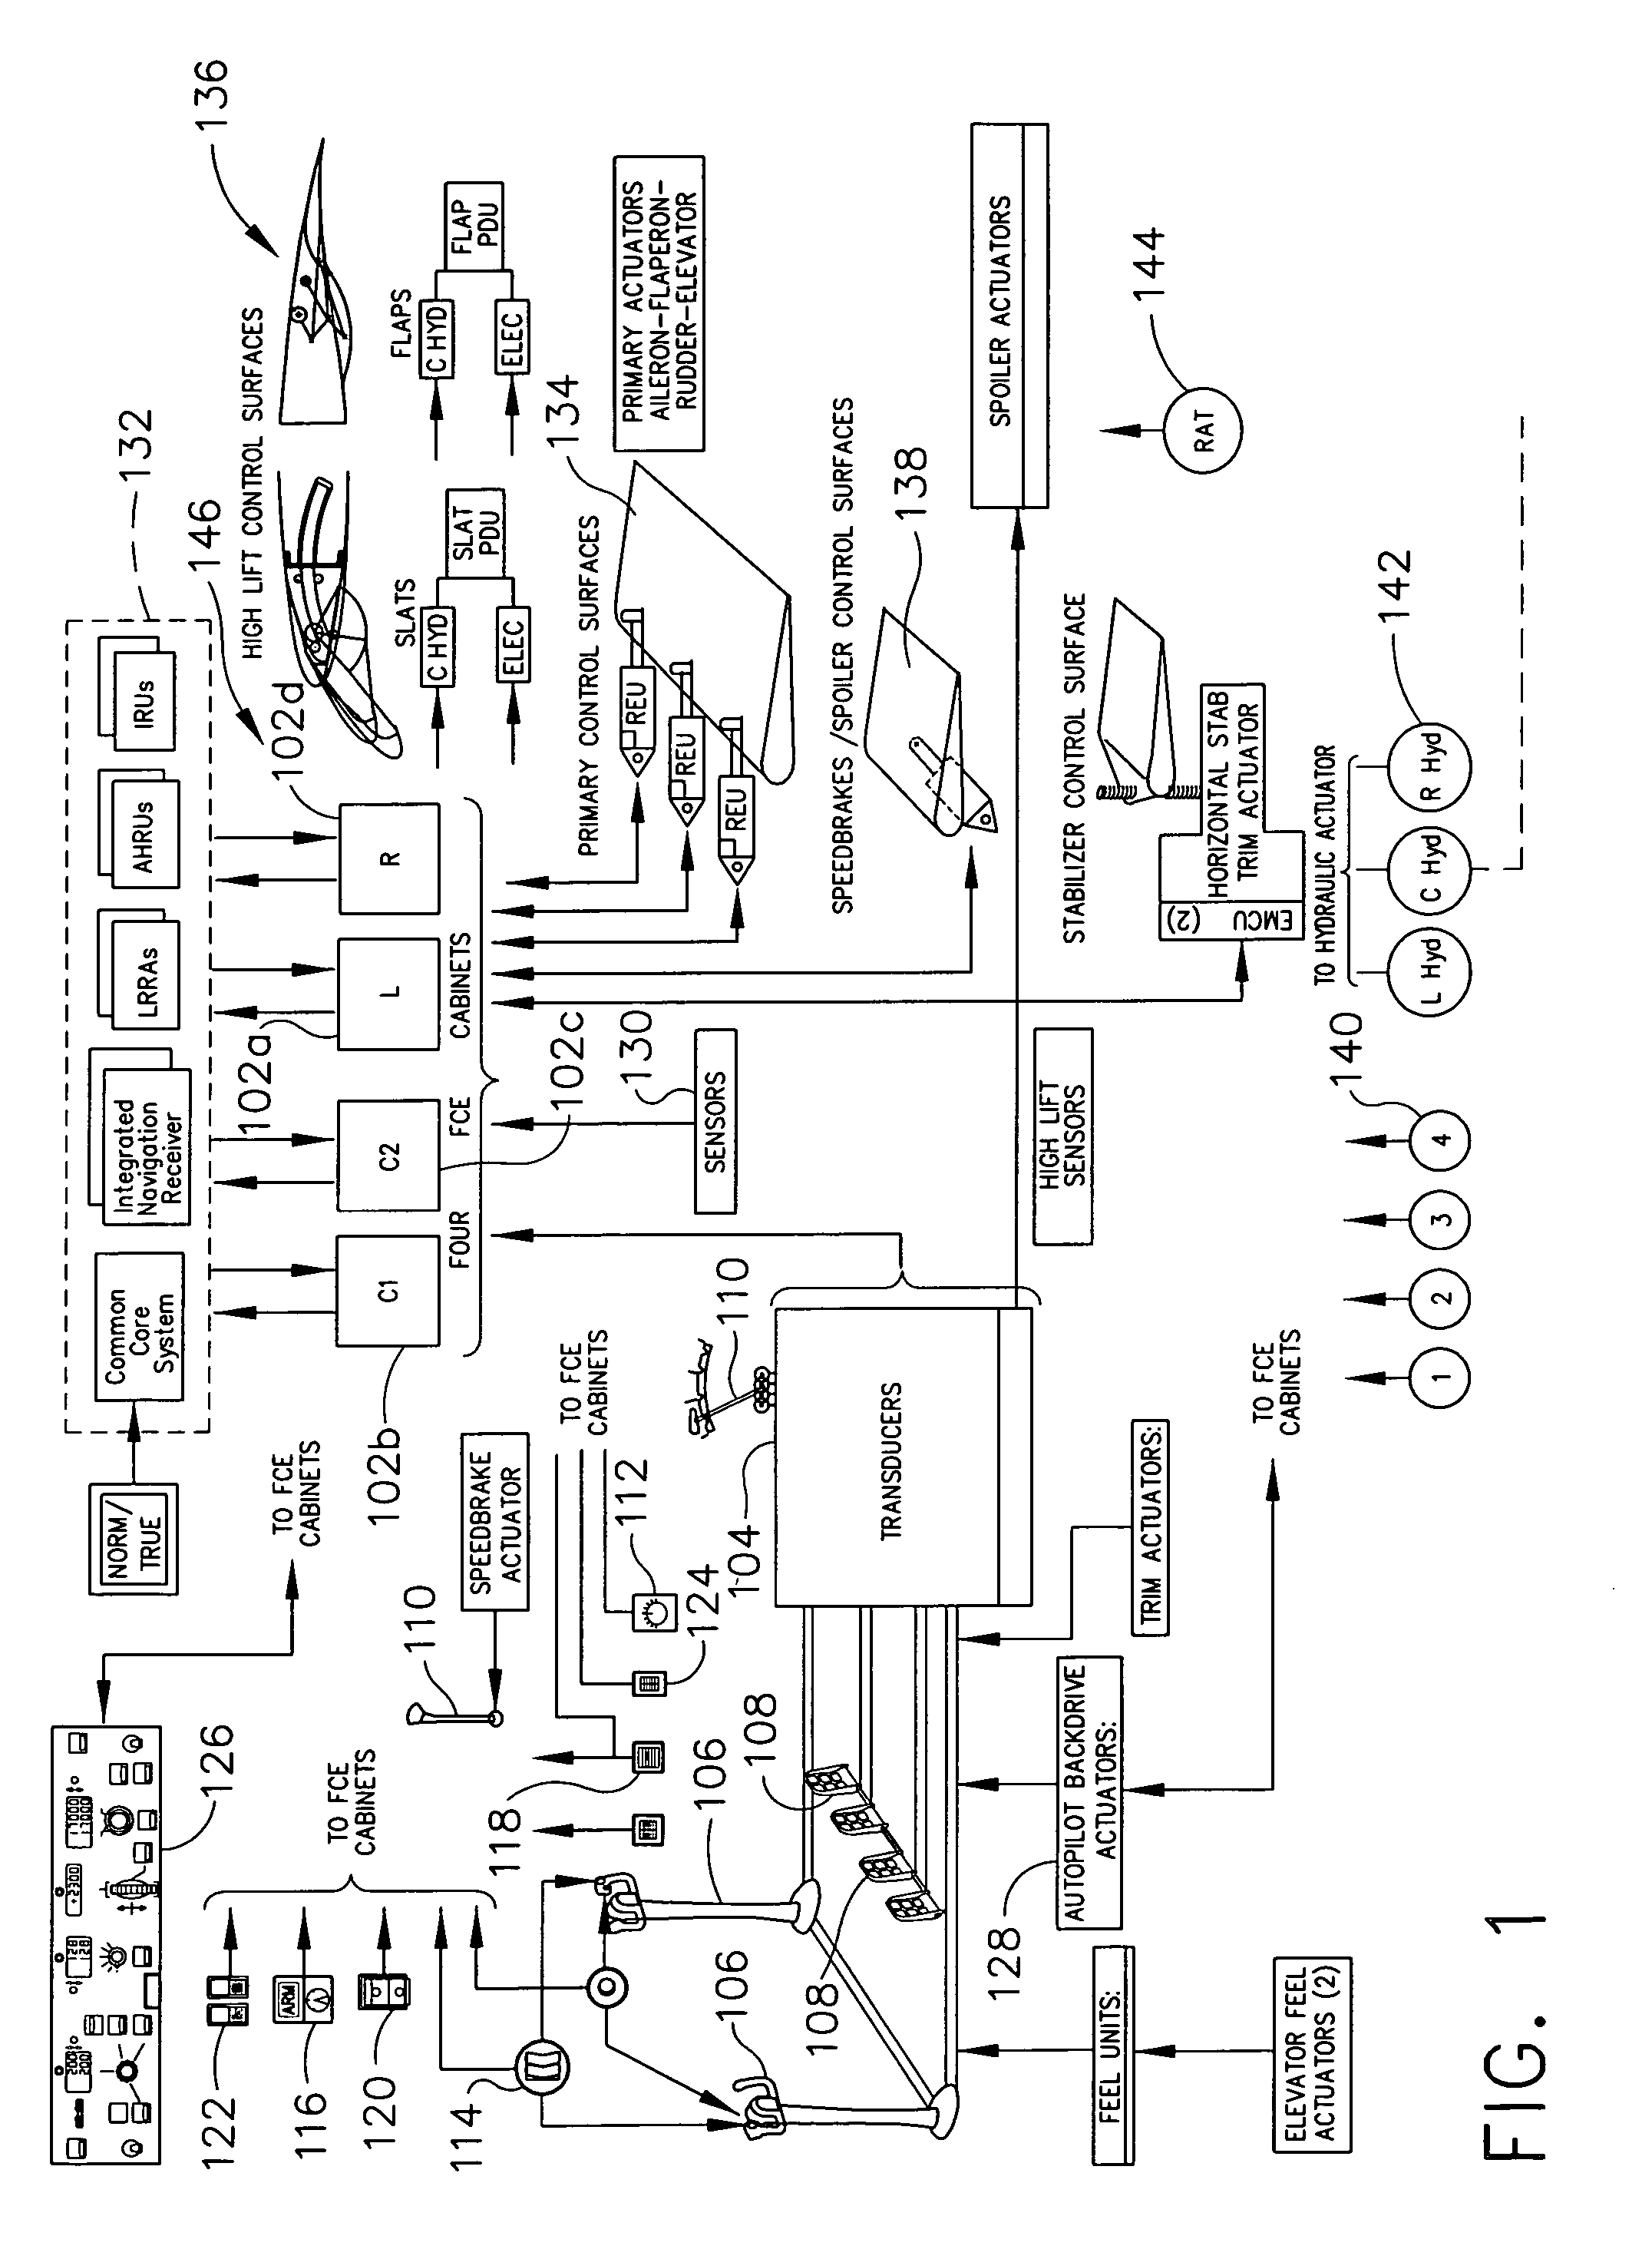 Methods and apparatus for implementing mid-value selection functions for dual dissimlar processing modules